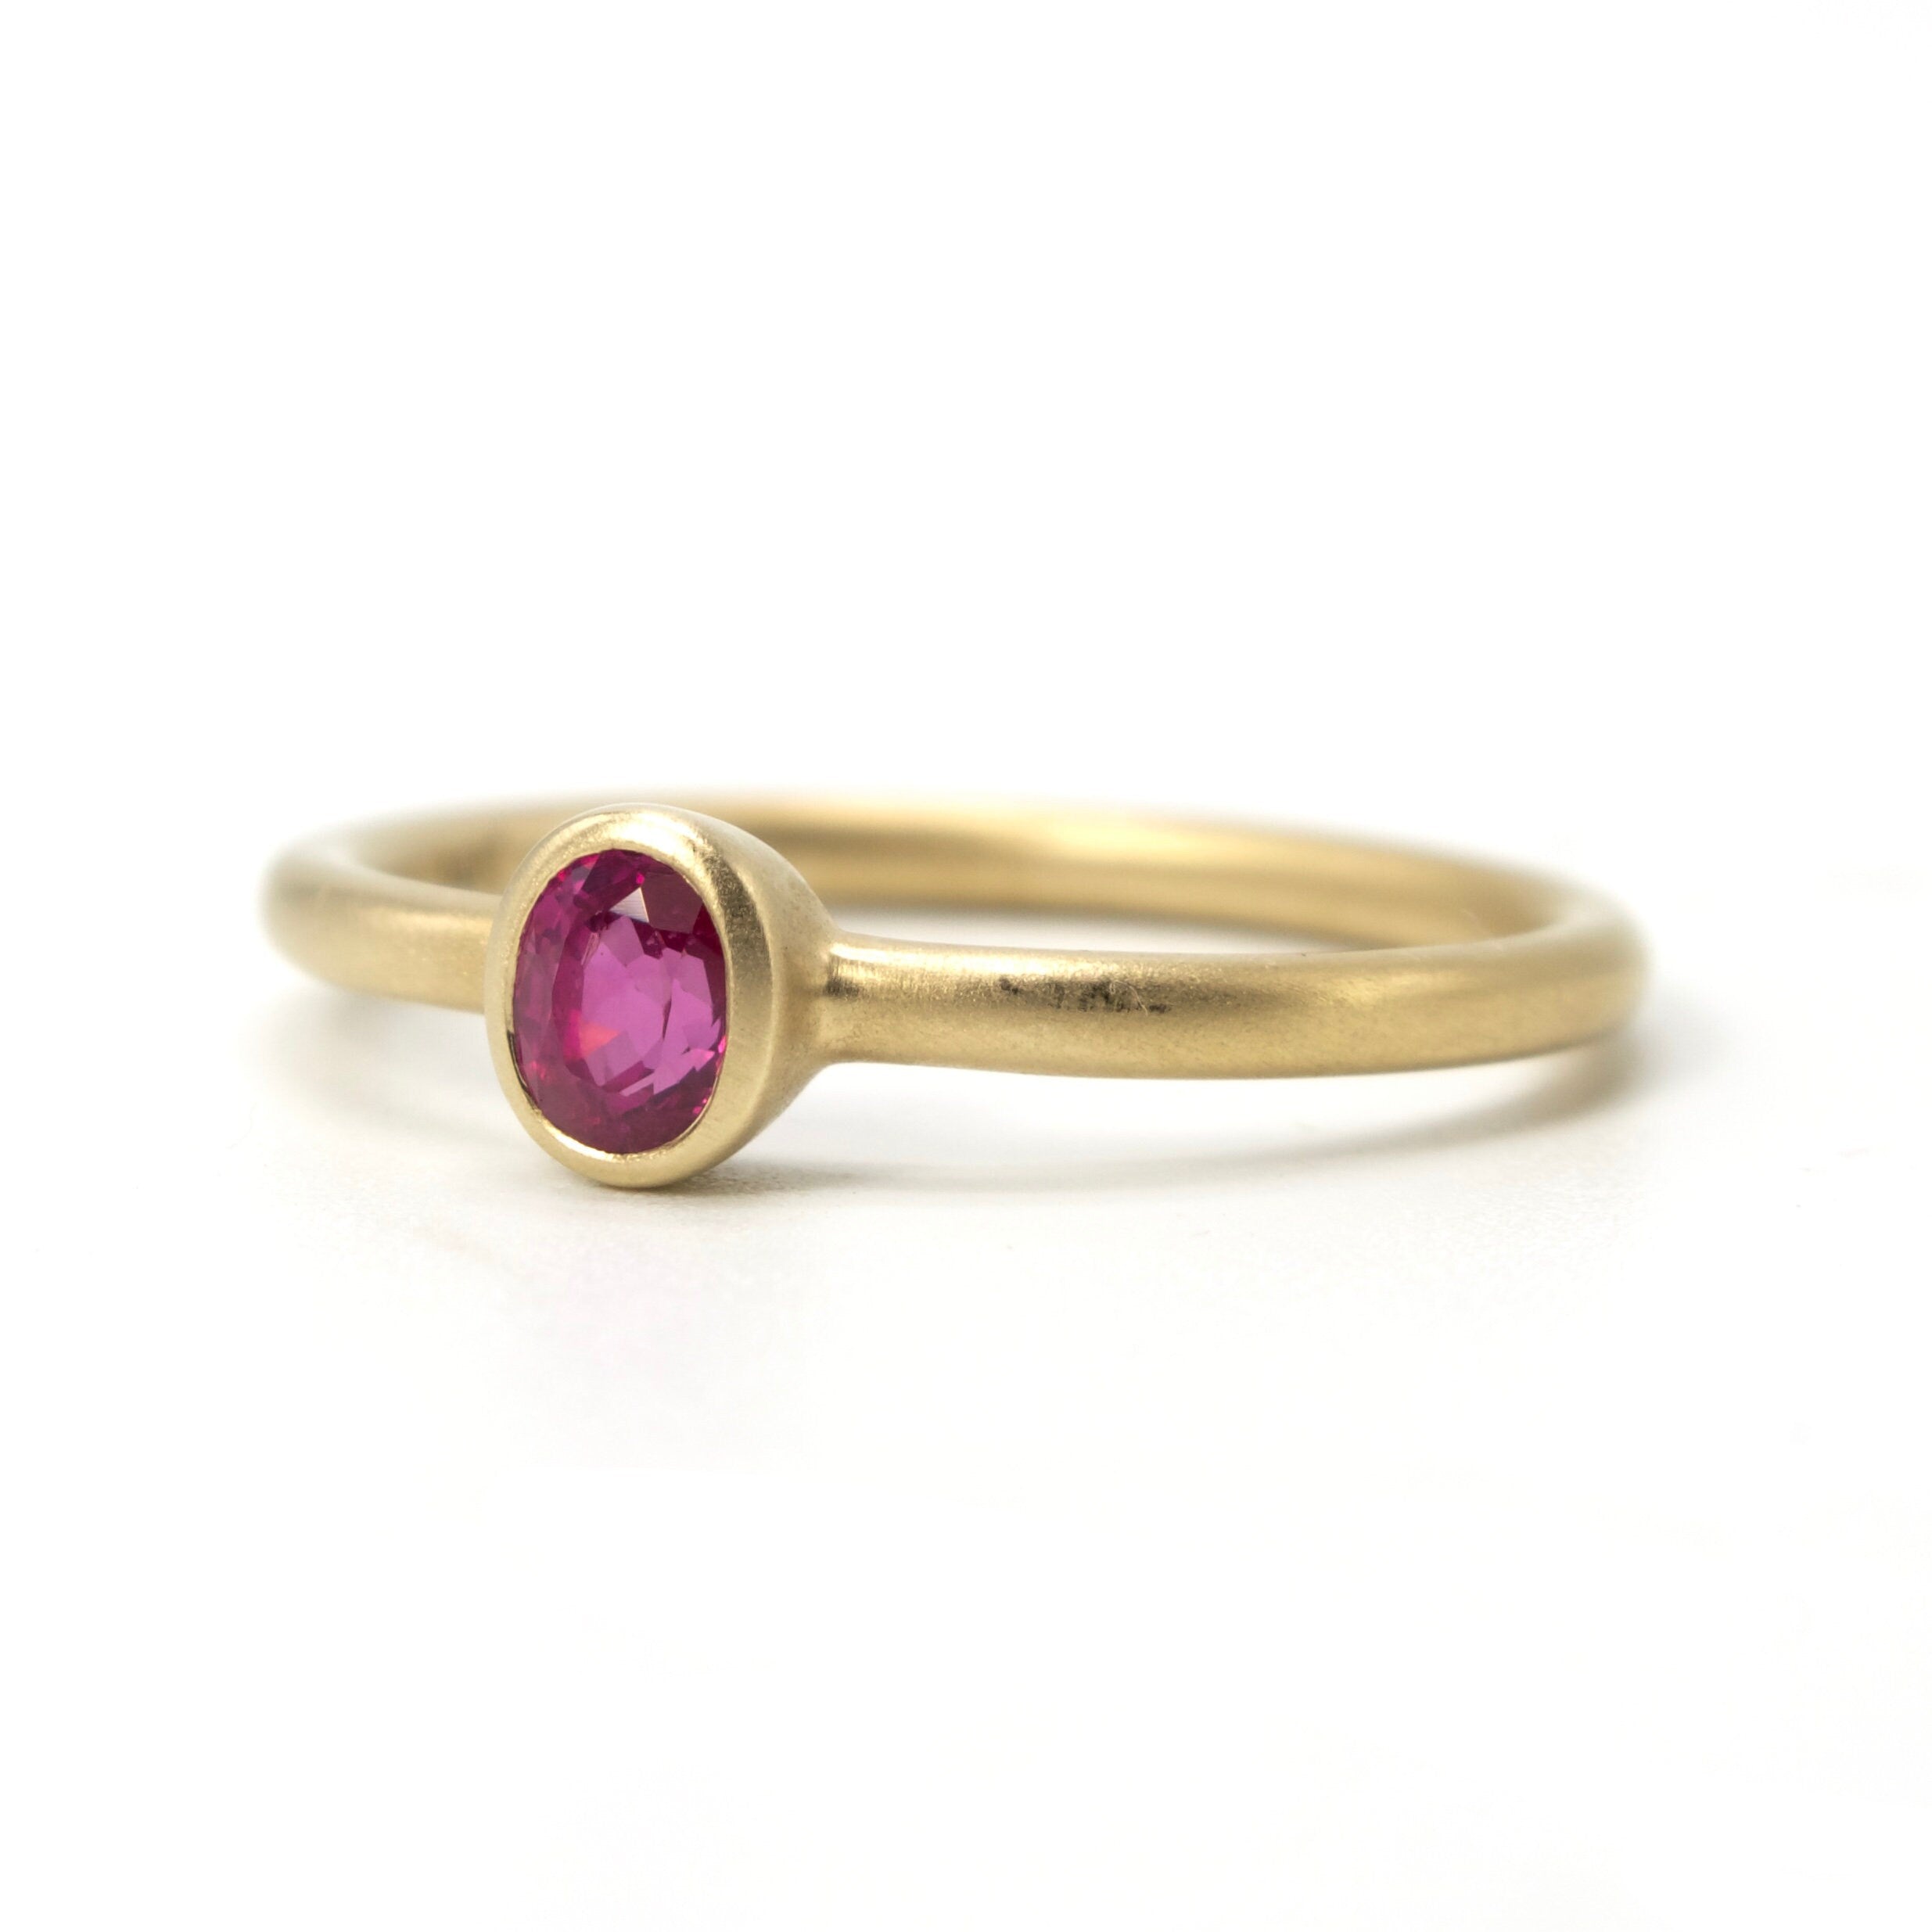 Bezel Set Oval Cut Ruby Solitaire in Brushed Gold Mounting